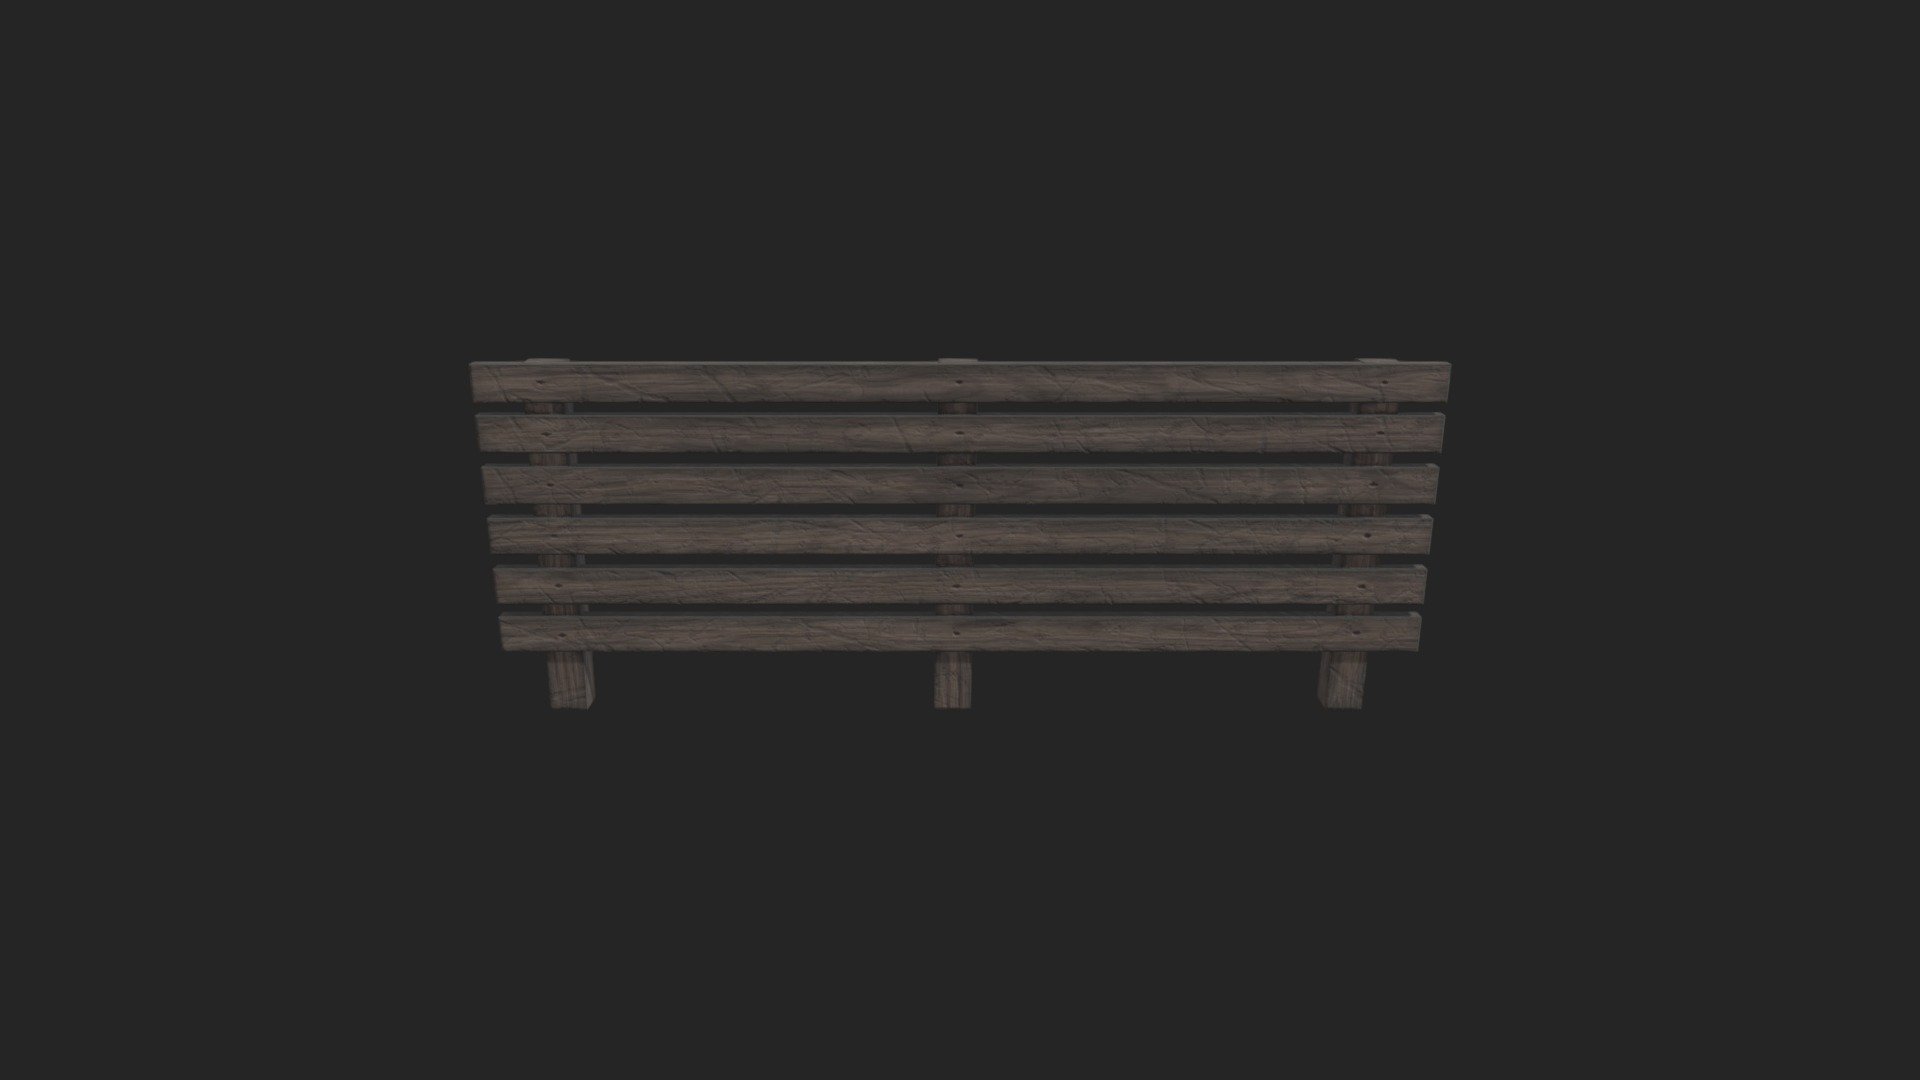 mesh :.fbx, .obj, .usdz, Textures: for Unreal, Unity, Arnold, Vray, Corona All textures have resolution 2048x2048 Available in the Targa formats

Verts:144 Edges:252 Faces:126 Tris:252 Uvs:360 - Wood Fence Low-poly 3D model - 3D model by Terdpong 3d model